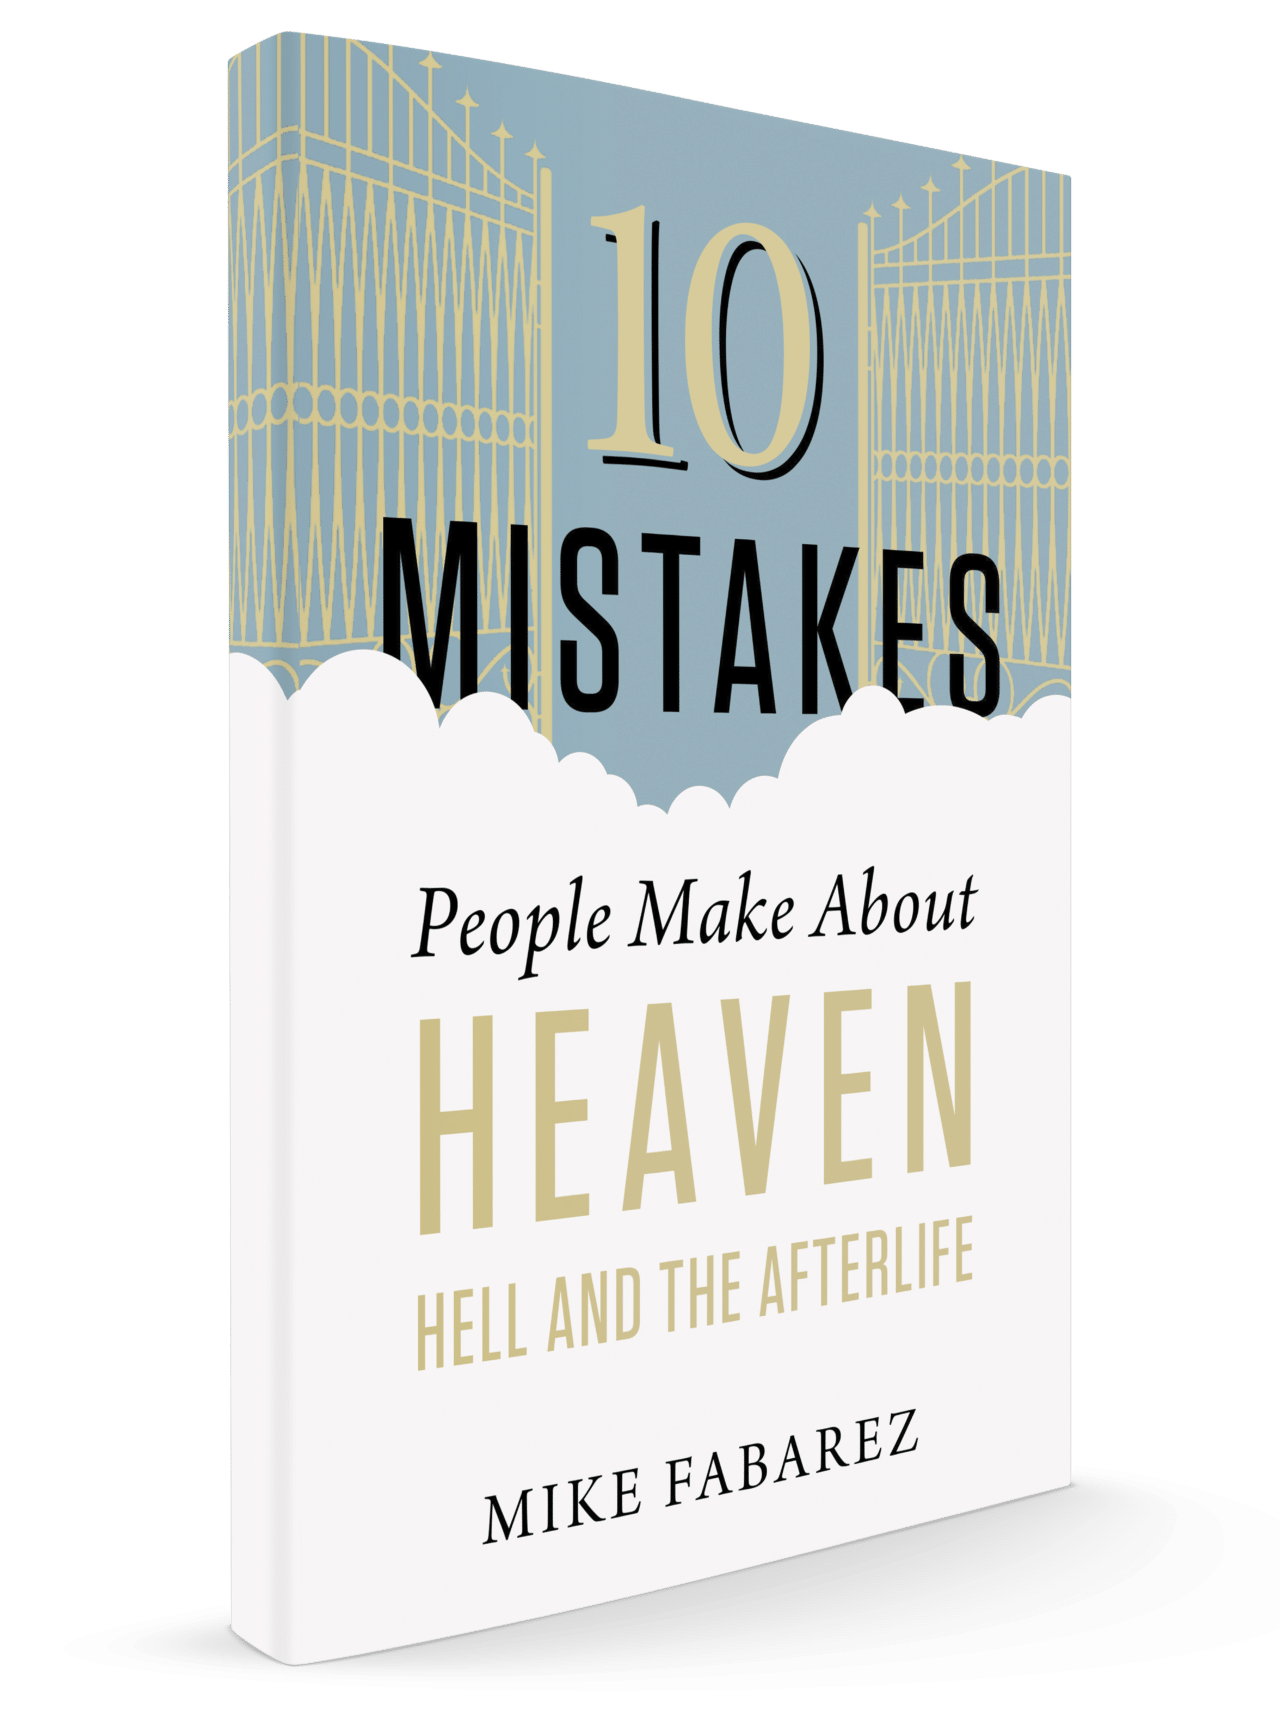 10 Mistakes People Make About Heaven, Hell and the Afterlife